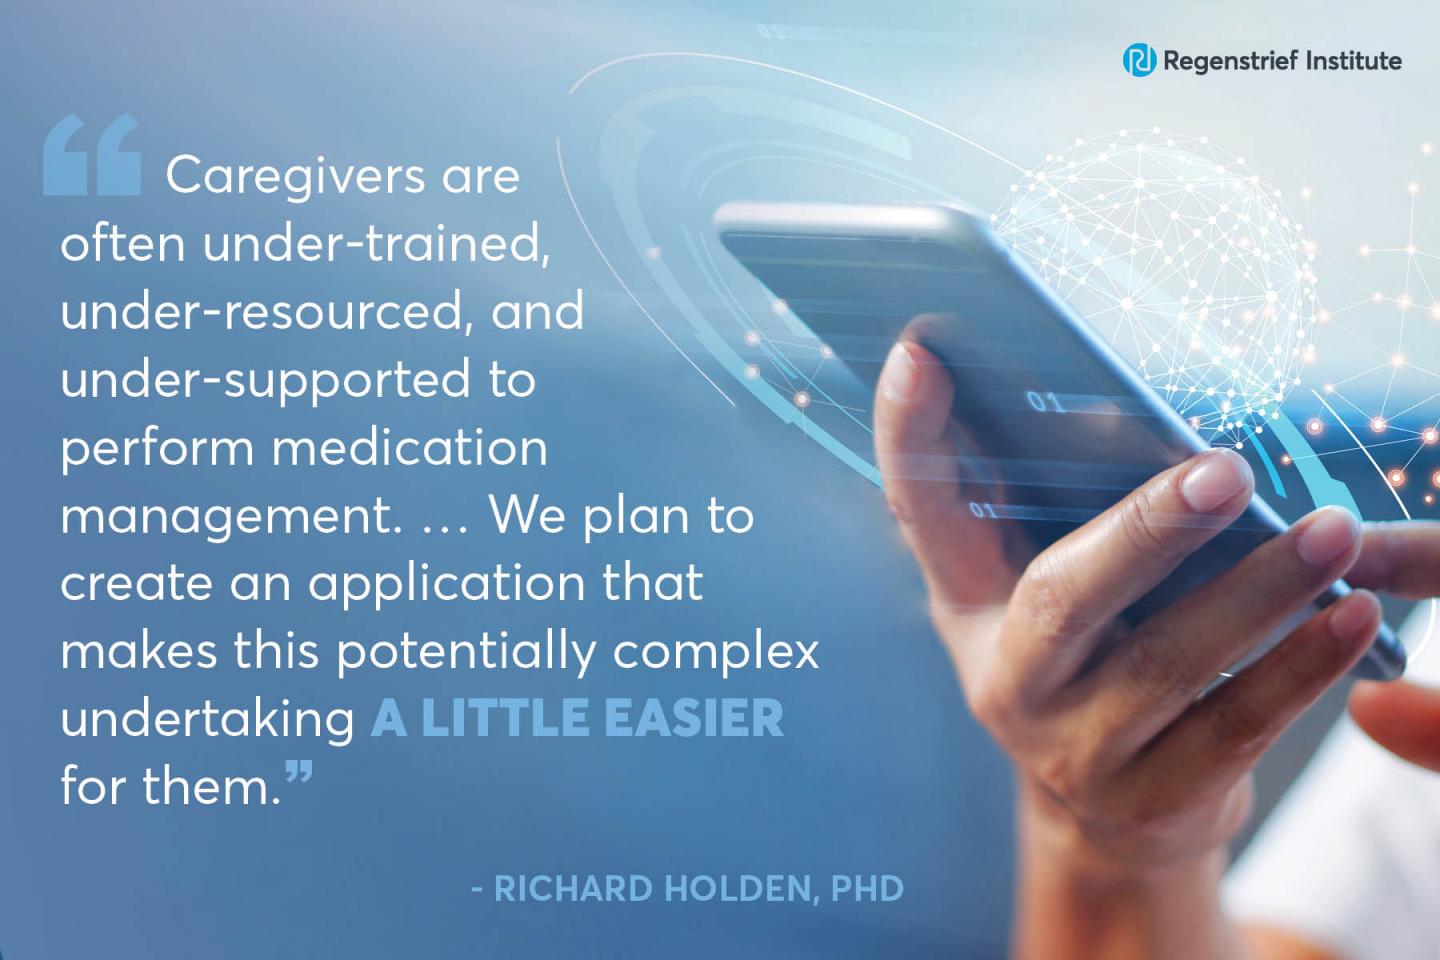 Using technology to help informal caregivers manage medication for patients with dementia